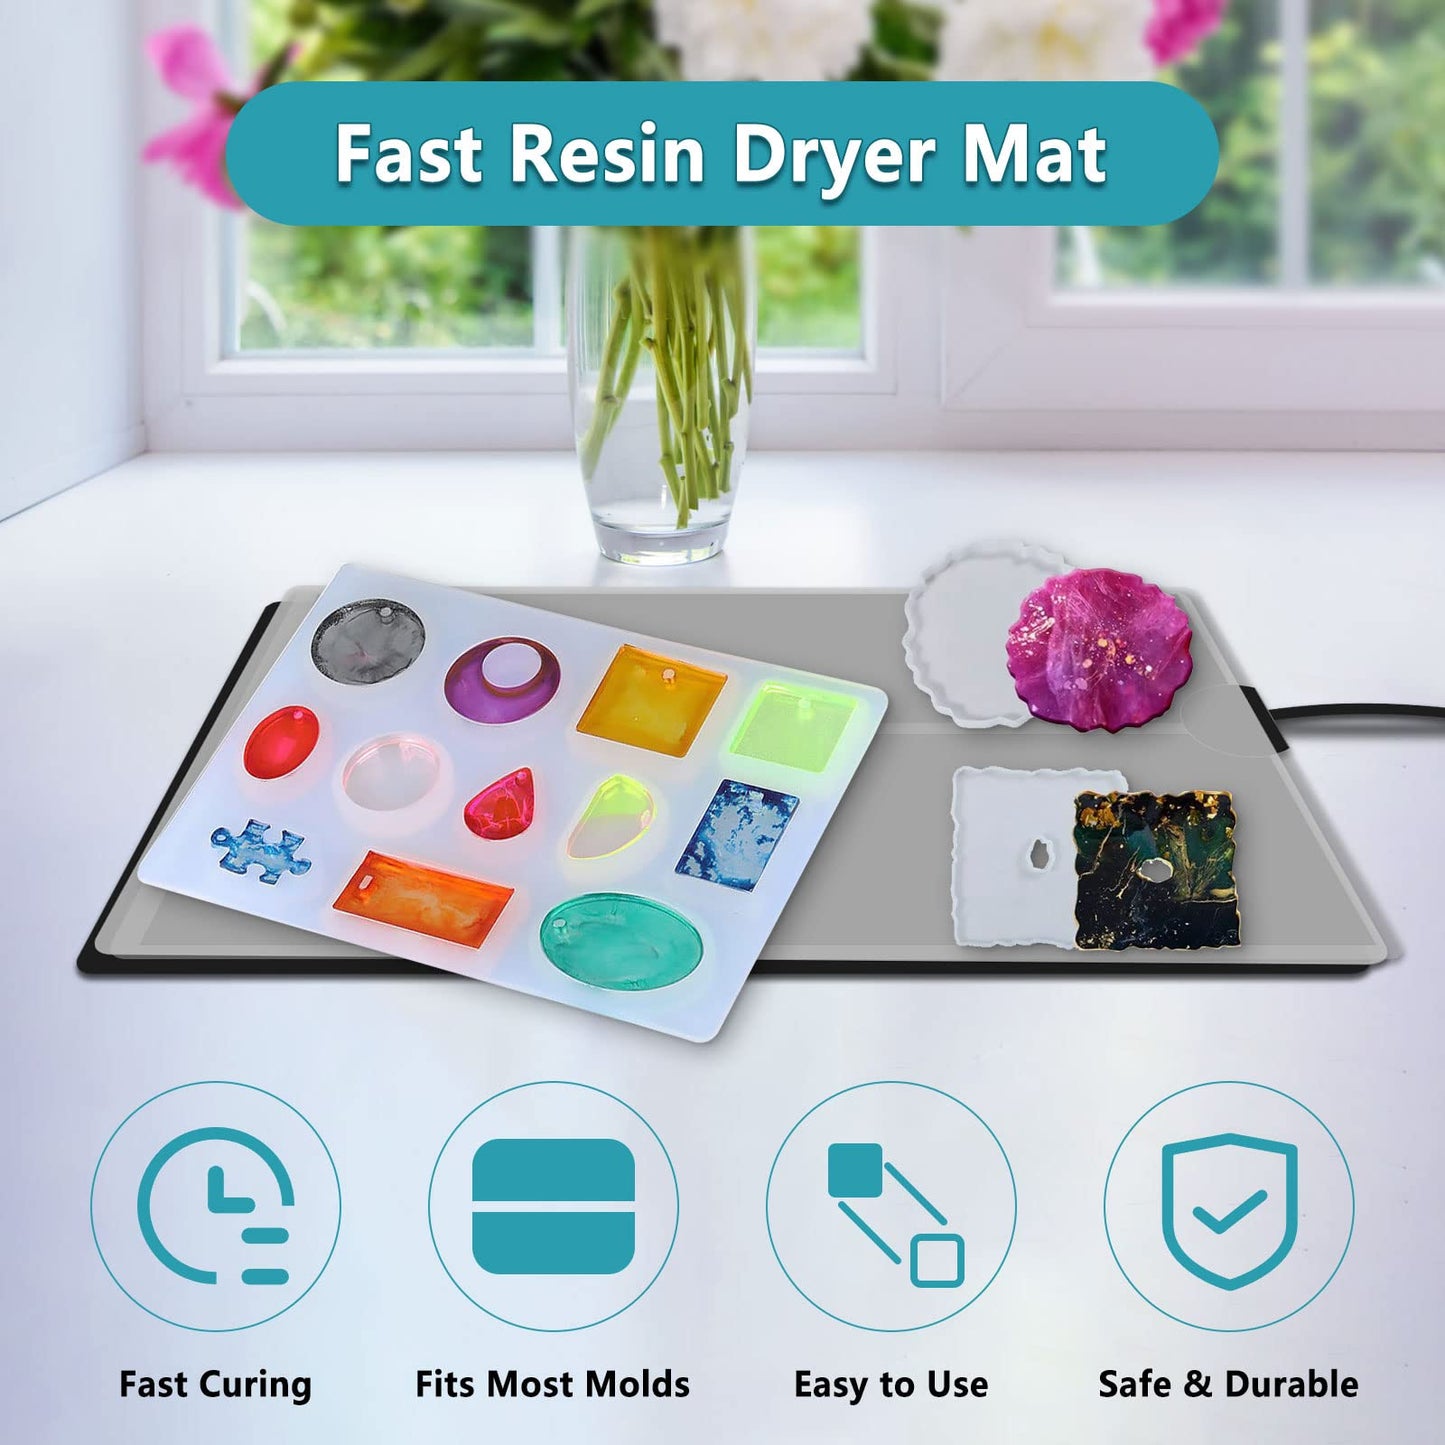 Resin Heating Mat, Resin Molds Heating Mat, Resin Curing Heating Mat, Epoxy Resin Curing Machine with Timer, Quick Resin Dryer Mat, Fast Hardening in 2 Hours, with Silicone Mat, for DIY Resin Supplies